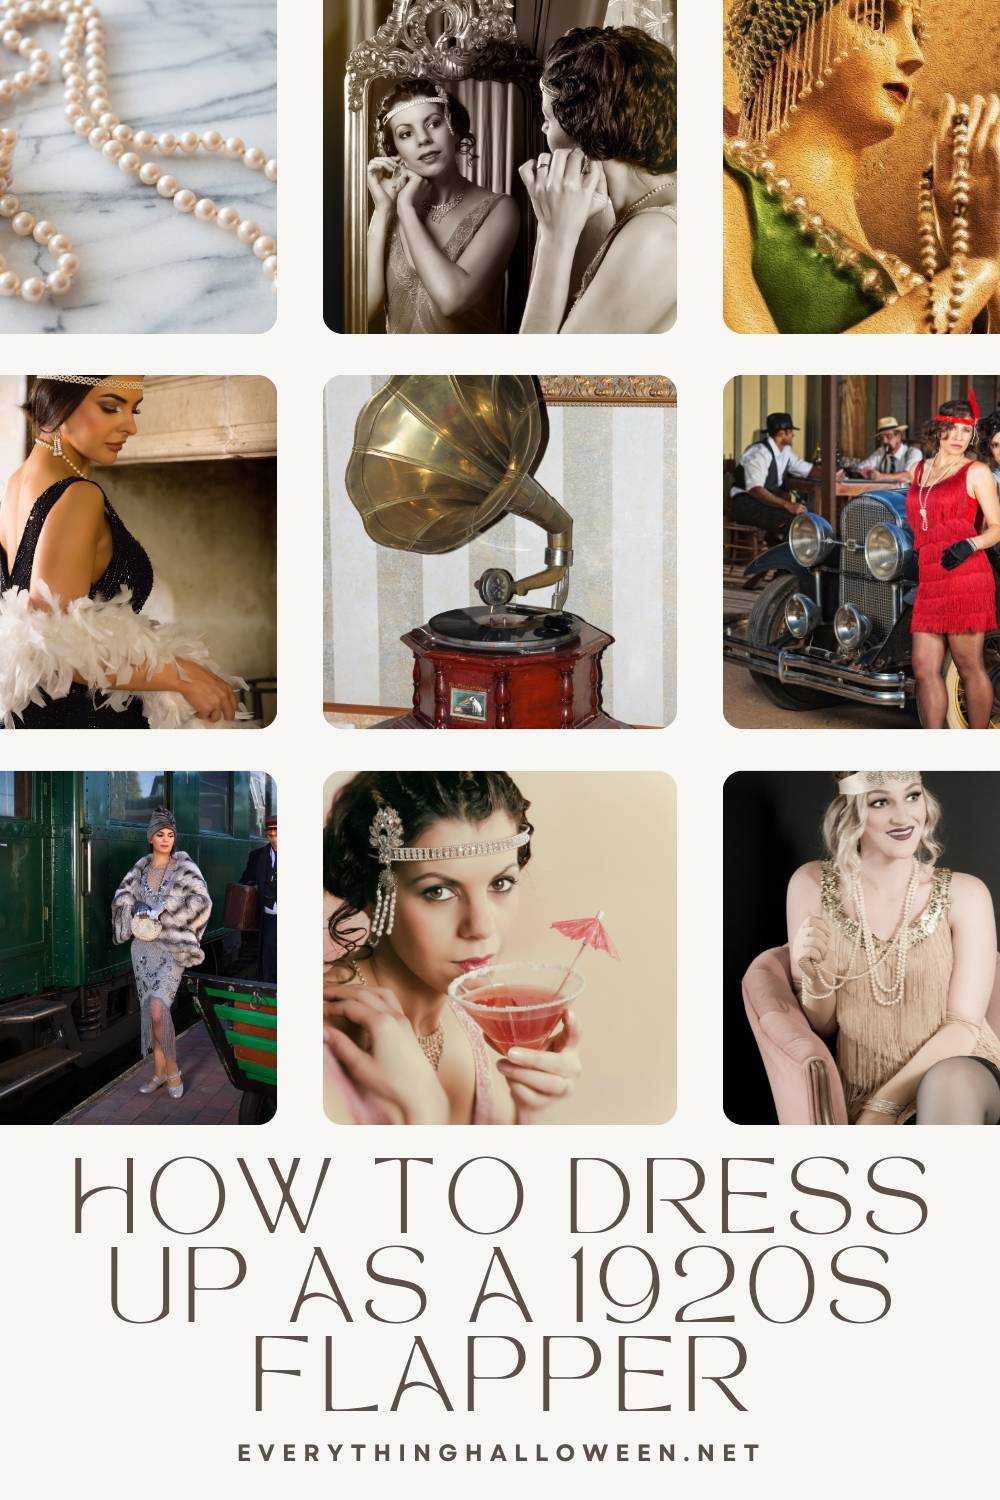 How to dress up as a glamorous 1920s flapper